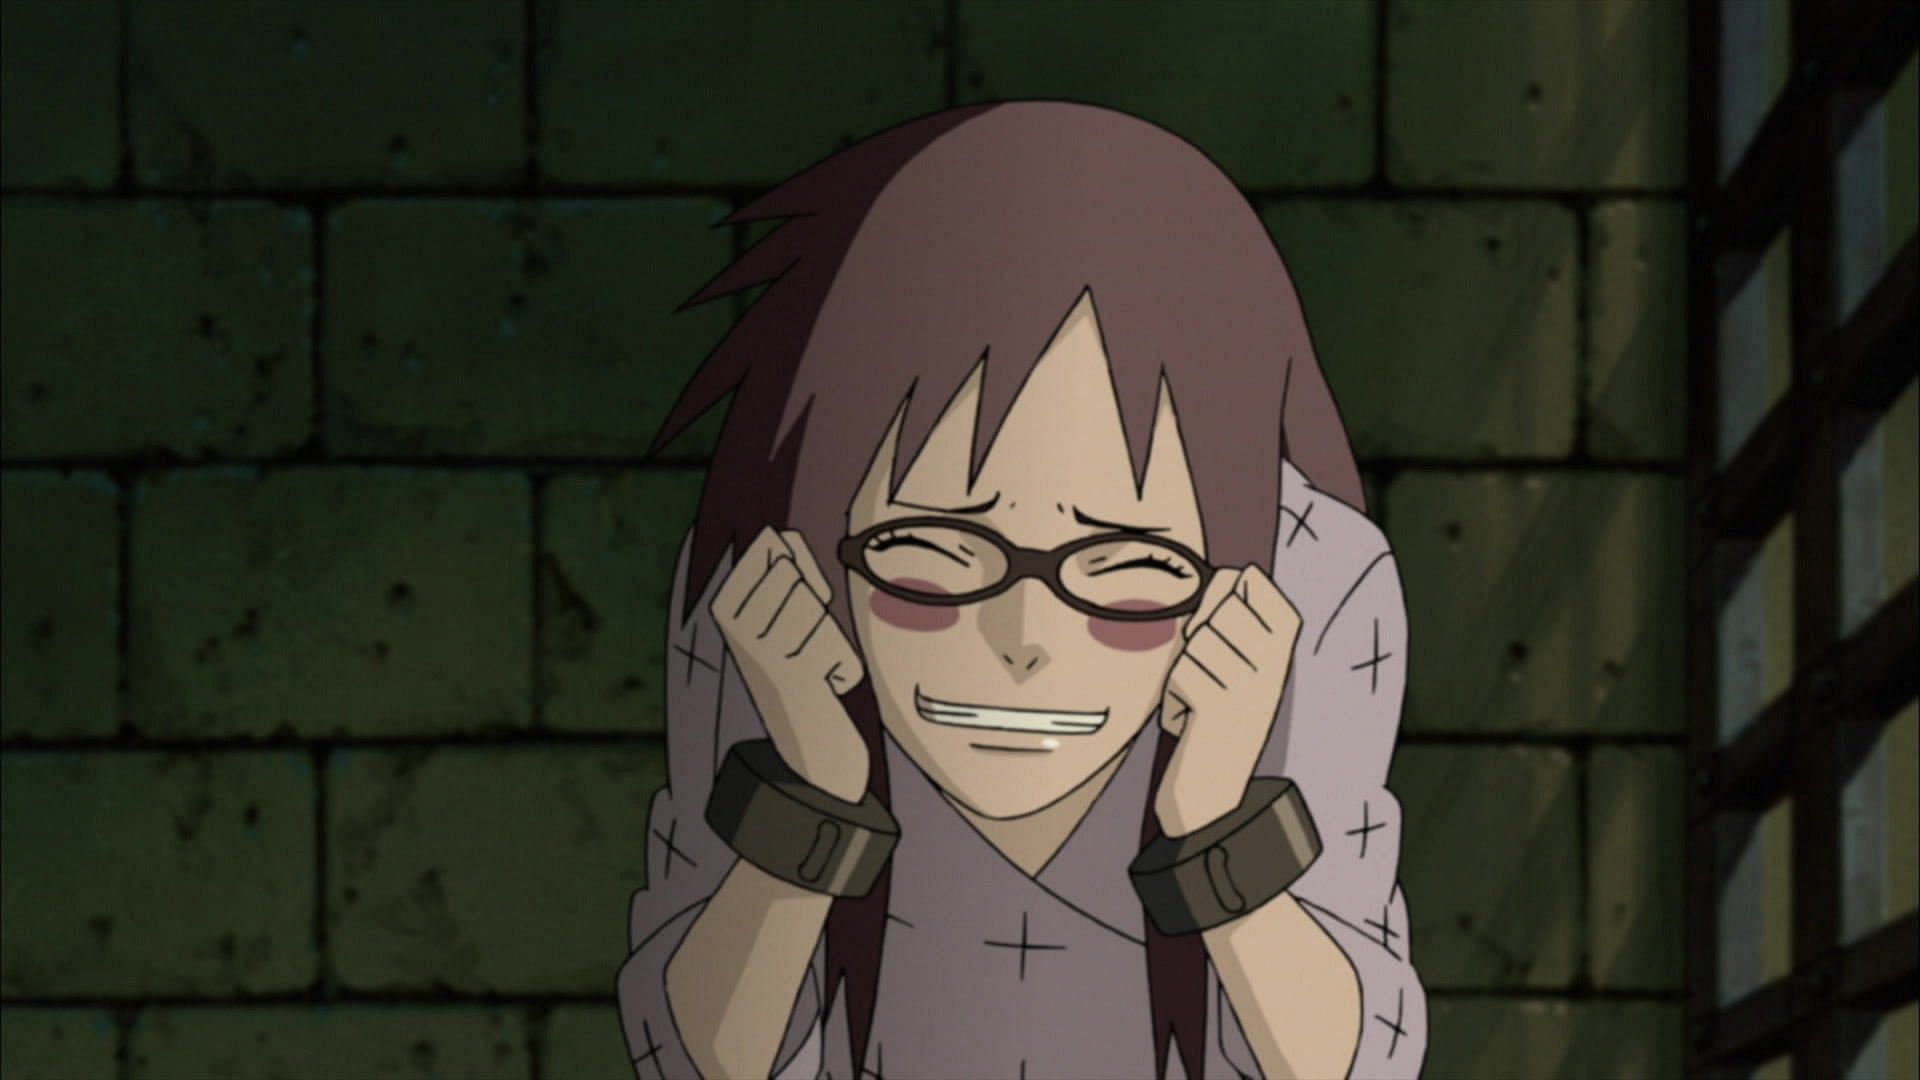 Karin's identity remained a mystery for most of the Naruto series (image via Studio Pierrot)